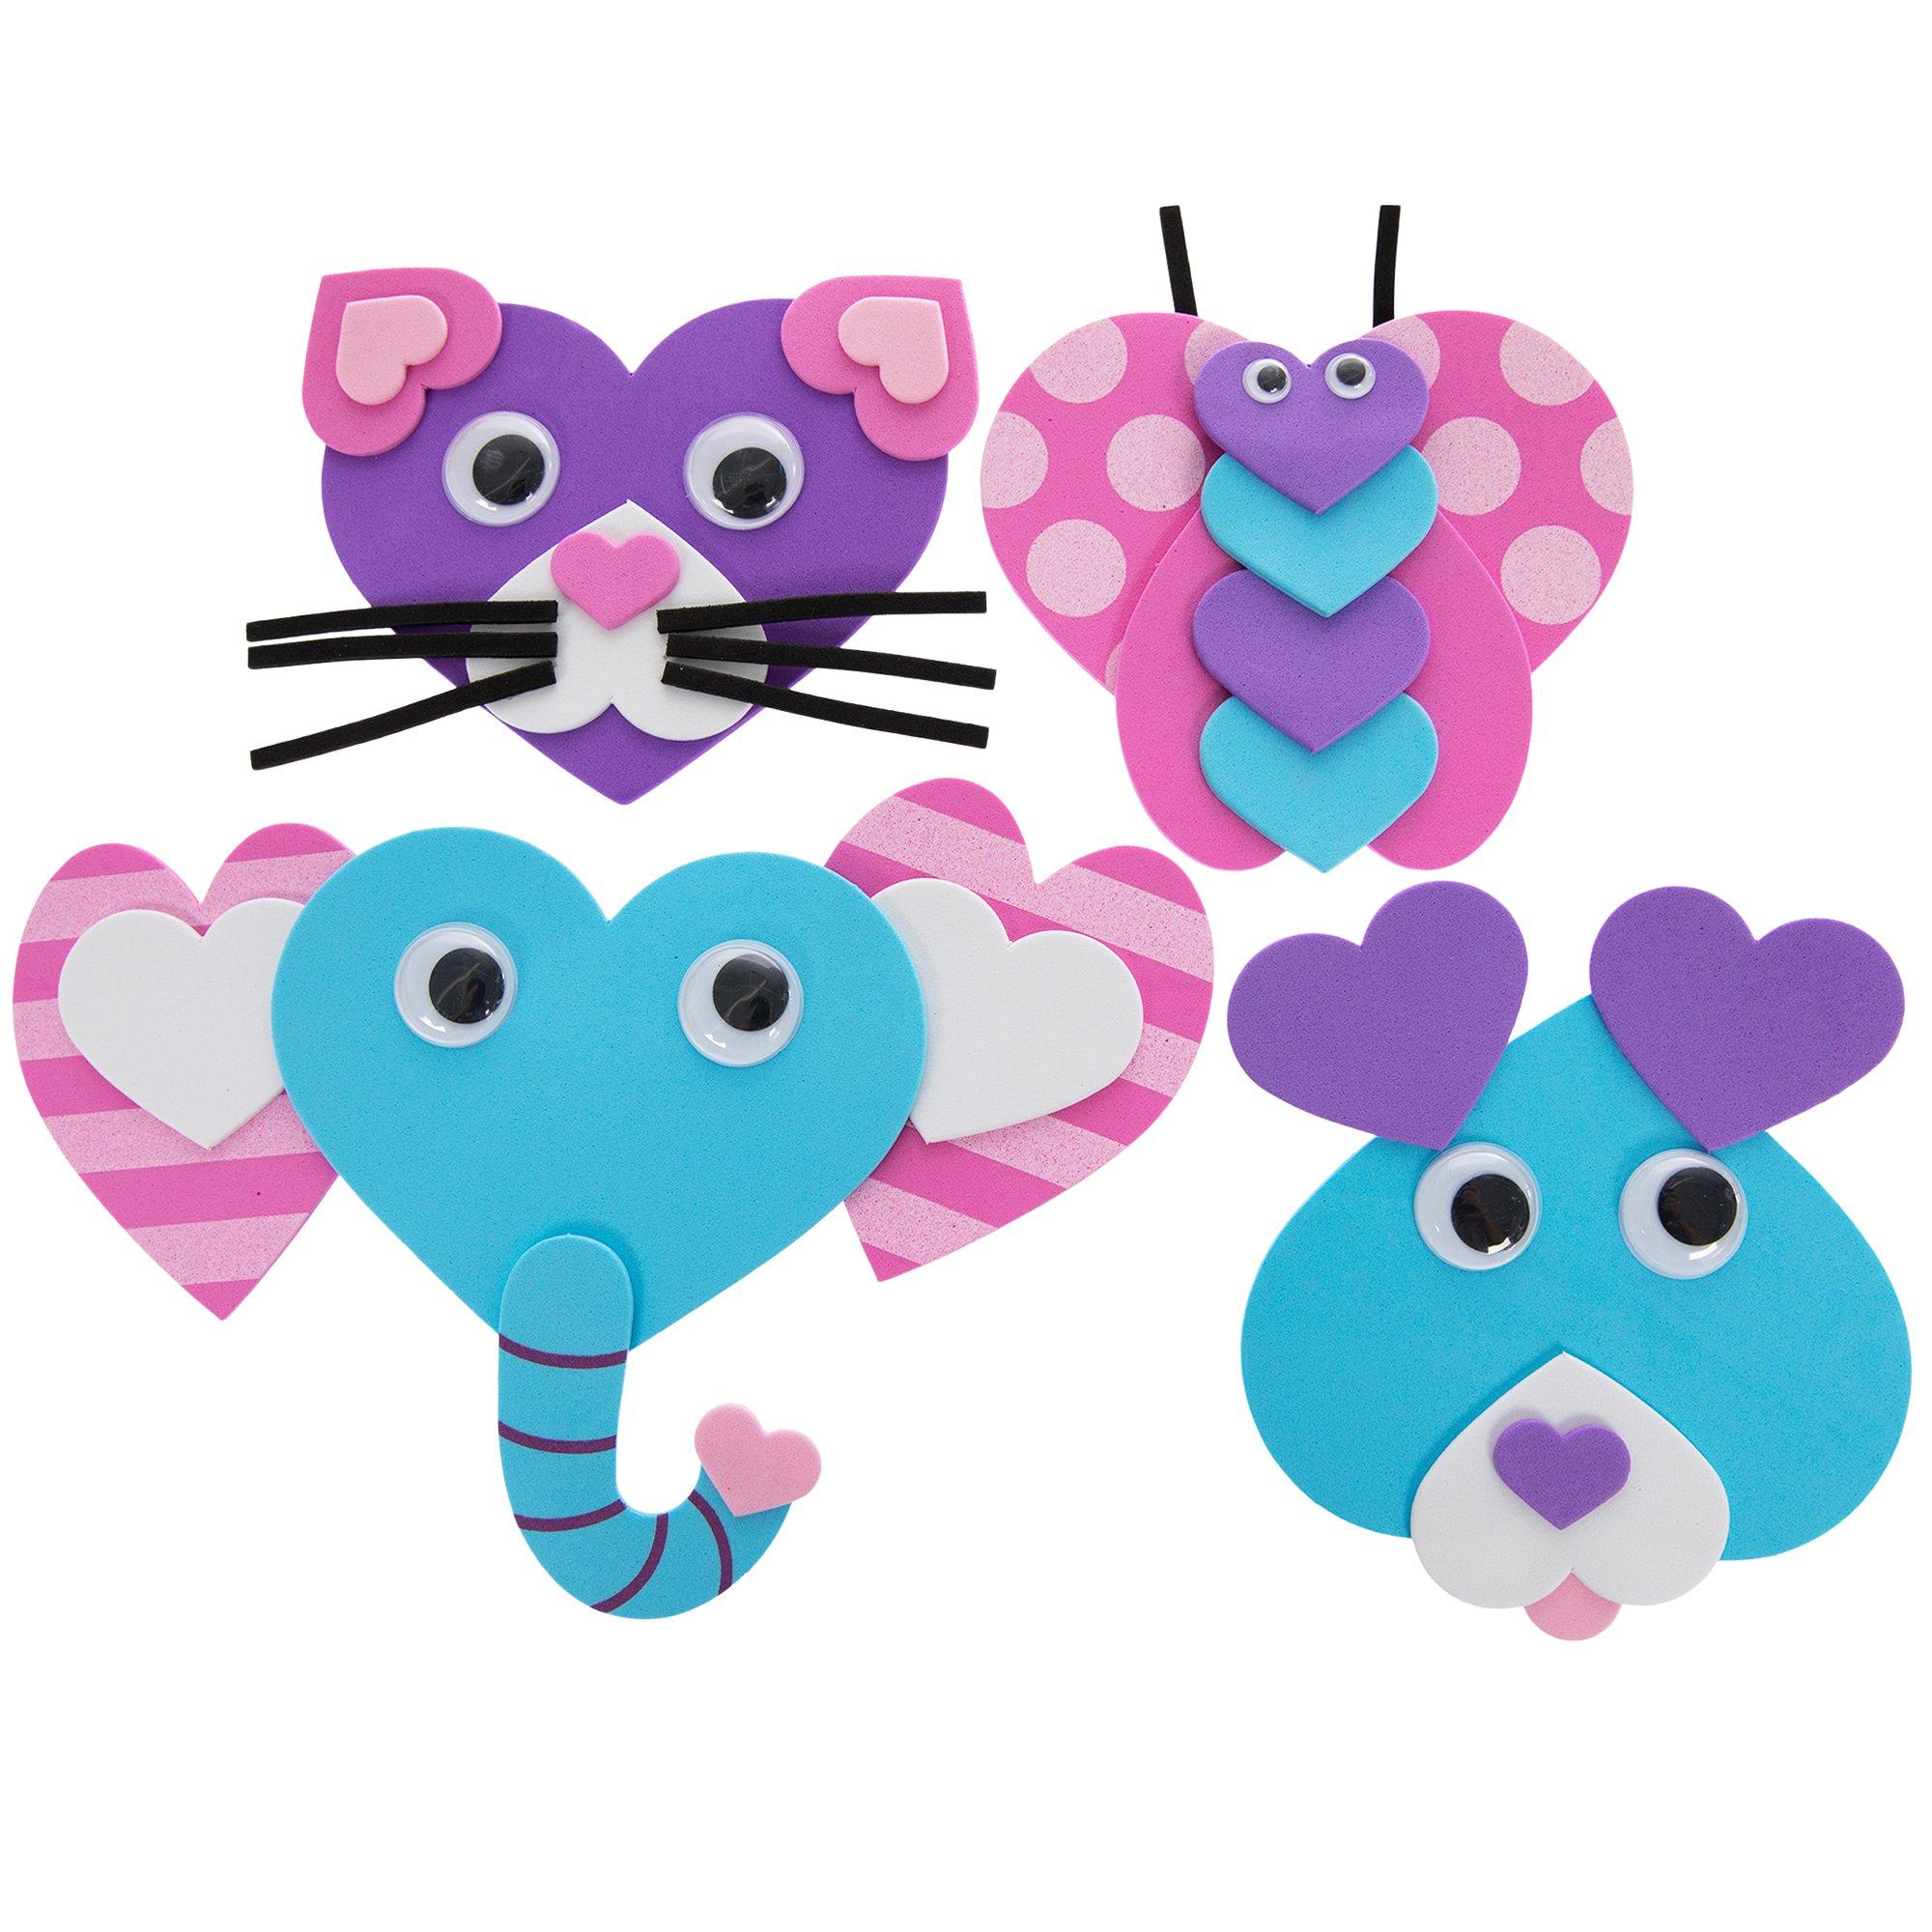  Winlyn 24 Sets Valentine's Day Craft Kits DIY Foam Hearts to  Animal Shape Ornaments Art Sets Heart Dog Unicorn Bee Cat Owl Butterfly  Ladybug Llama Decorations for Kids Valentine Spring Party